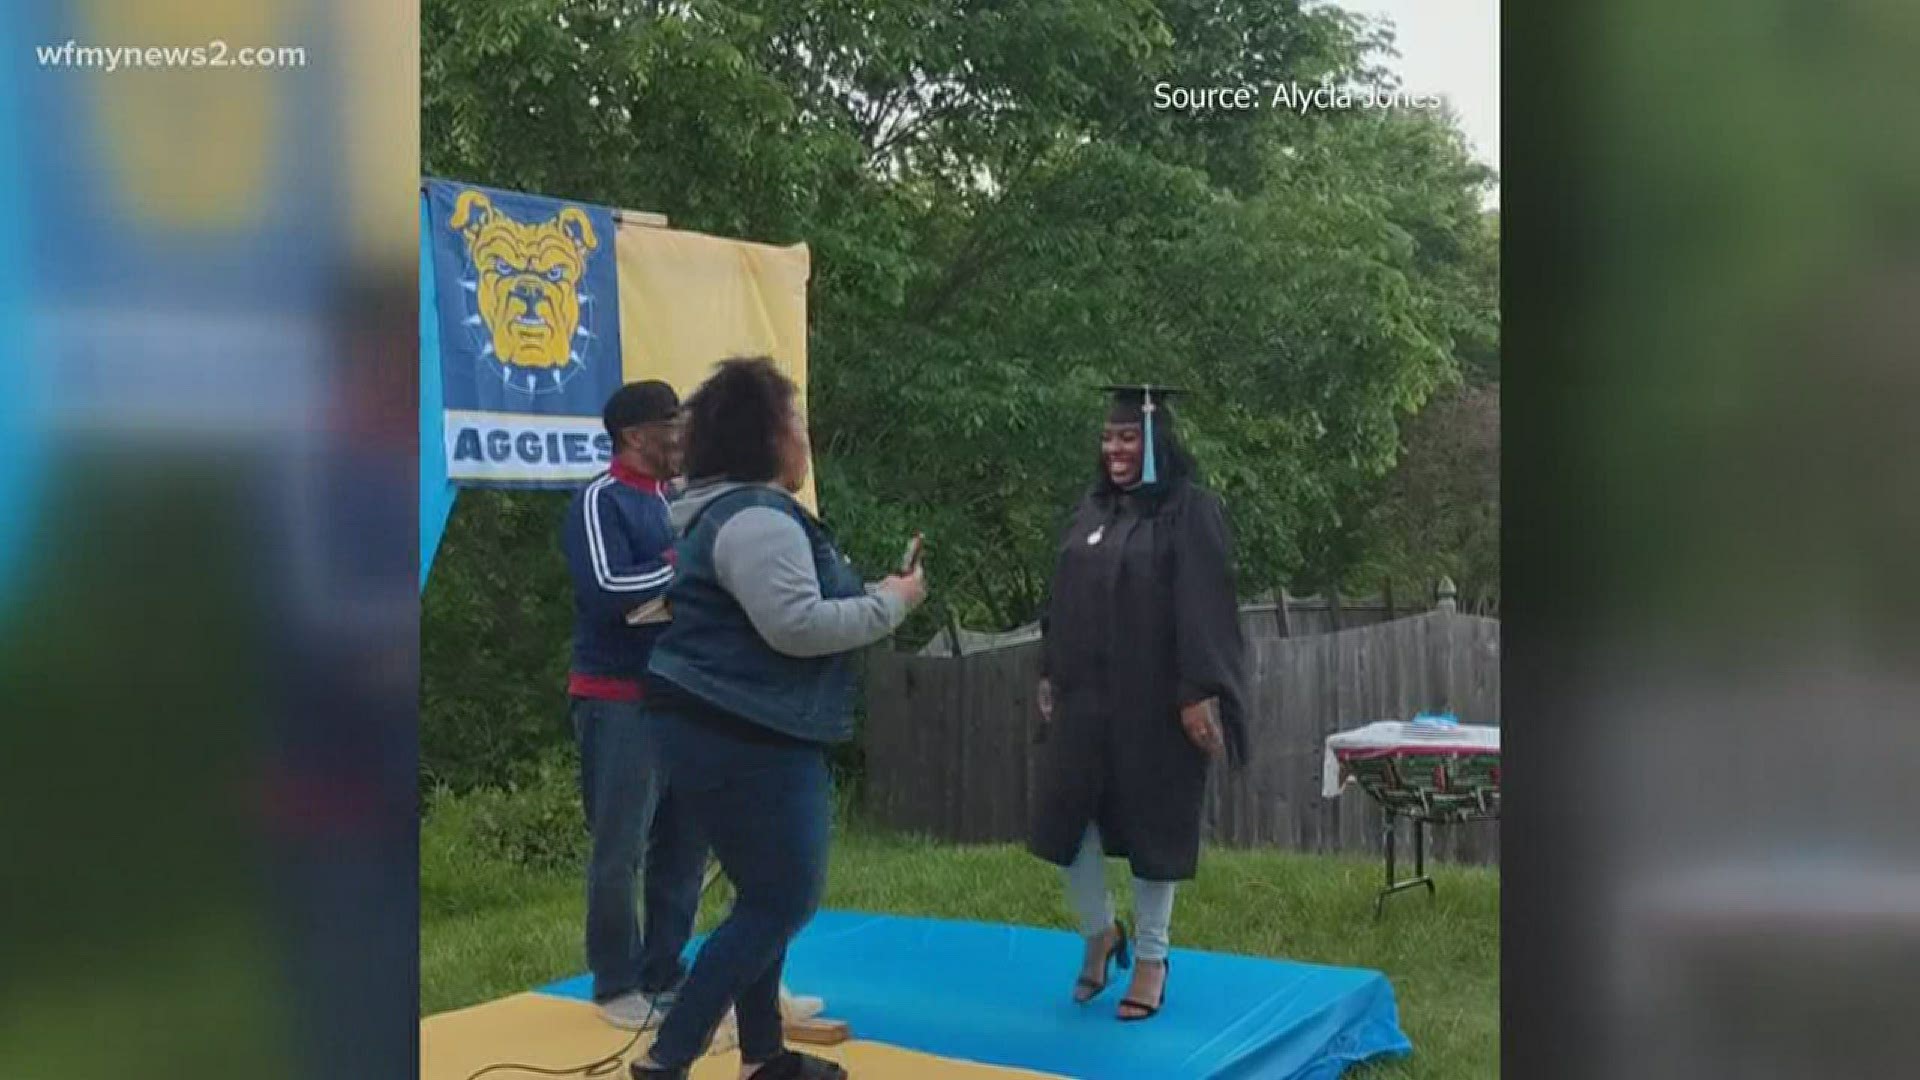 With traditional commencements called off, a Greensboro family transformed their backyard into a graduation ceremony to honor their NC A&T grad.